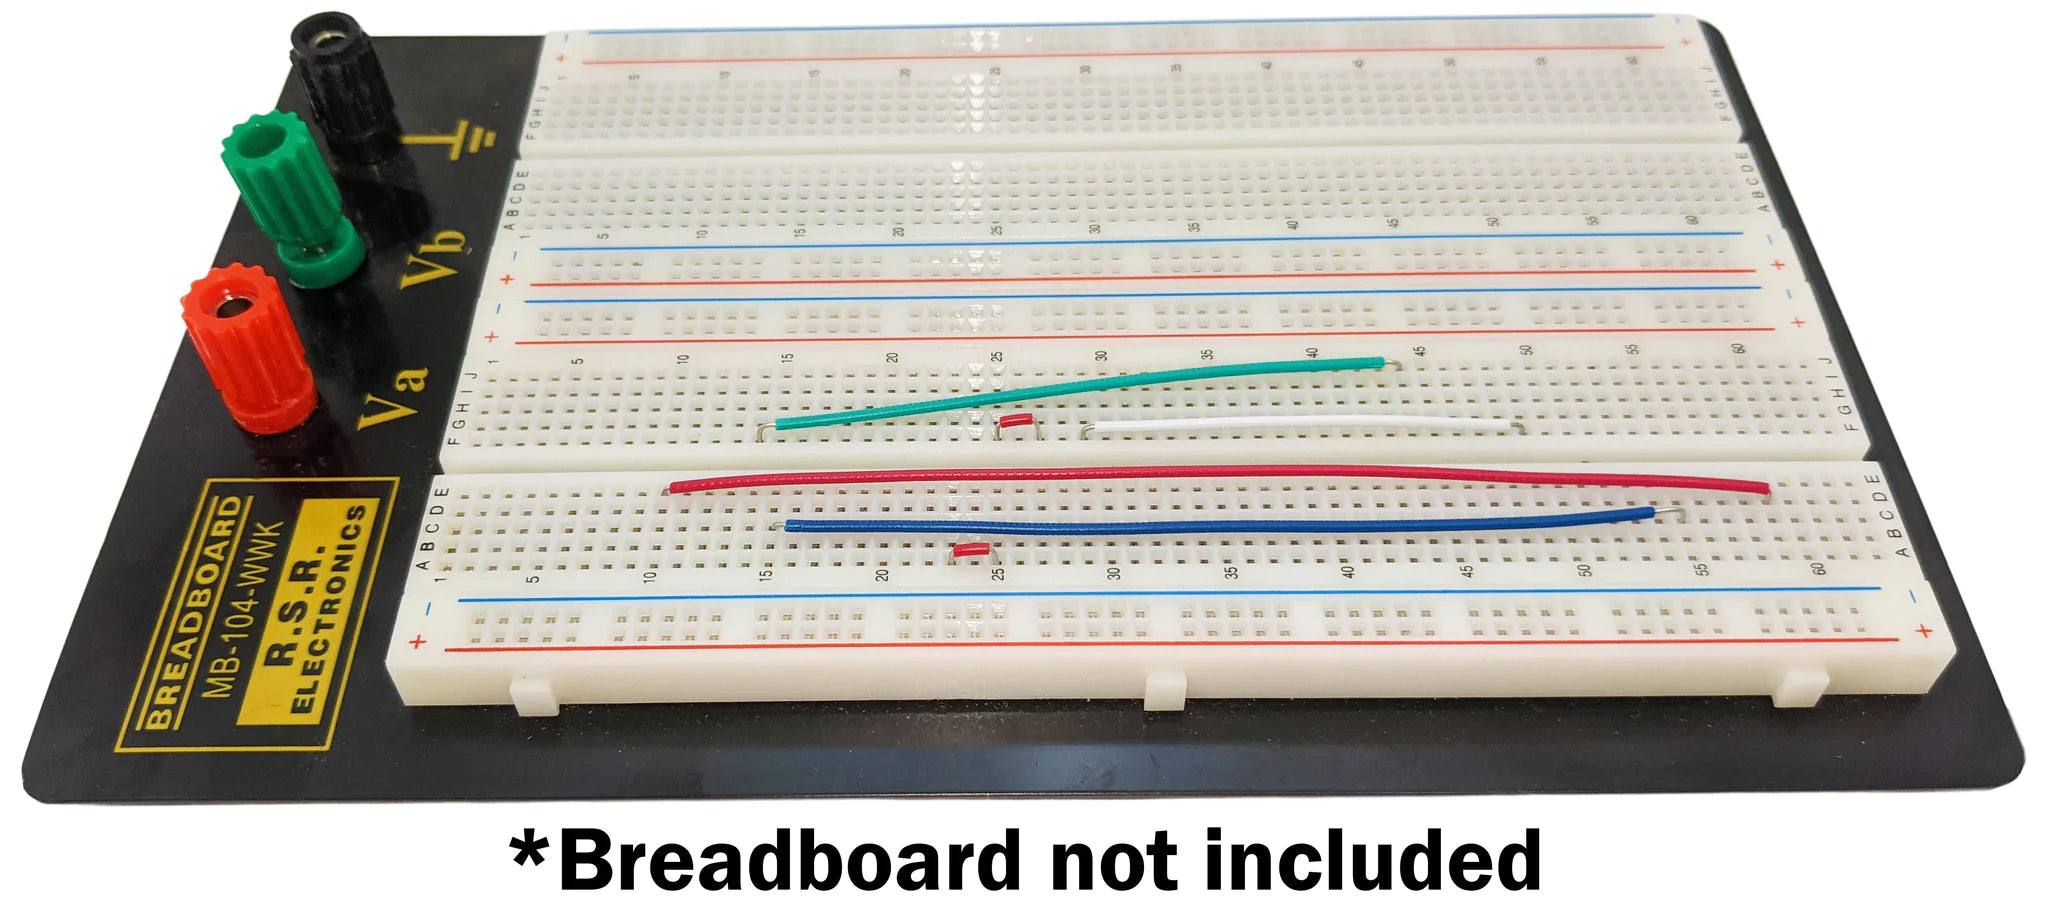 350 Piece Breadboard Jumper Wire Kit with Plastic Storage Case, Assorted Lengths and Colors